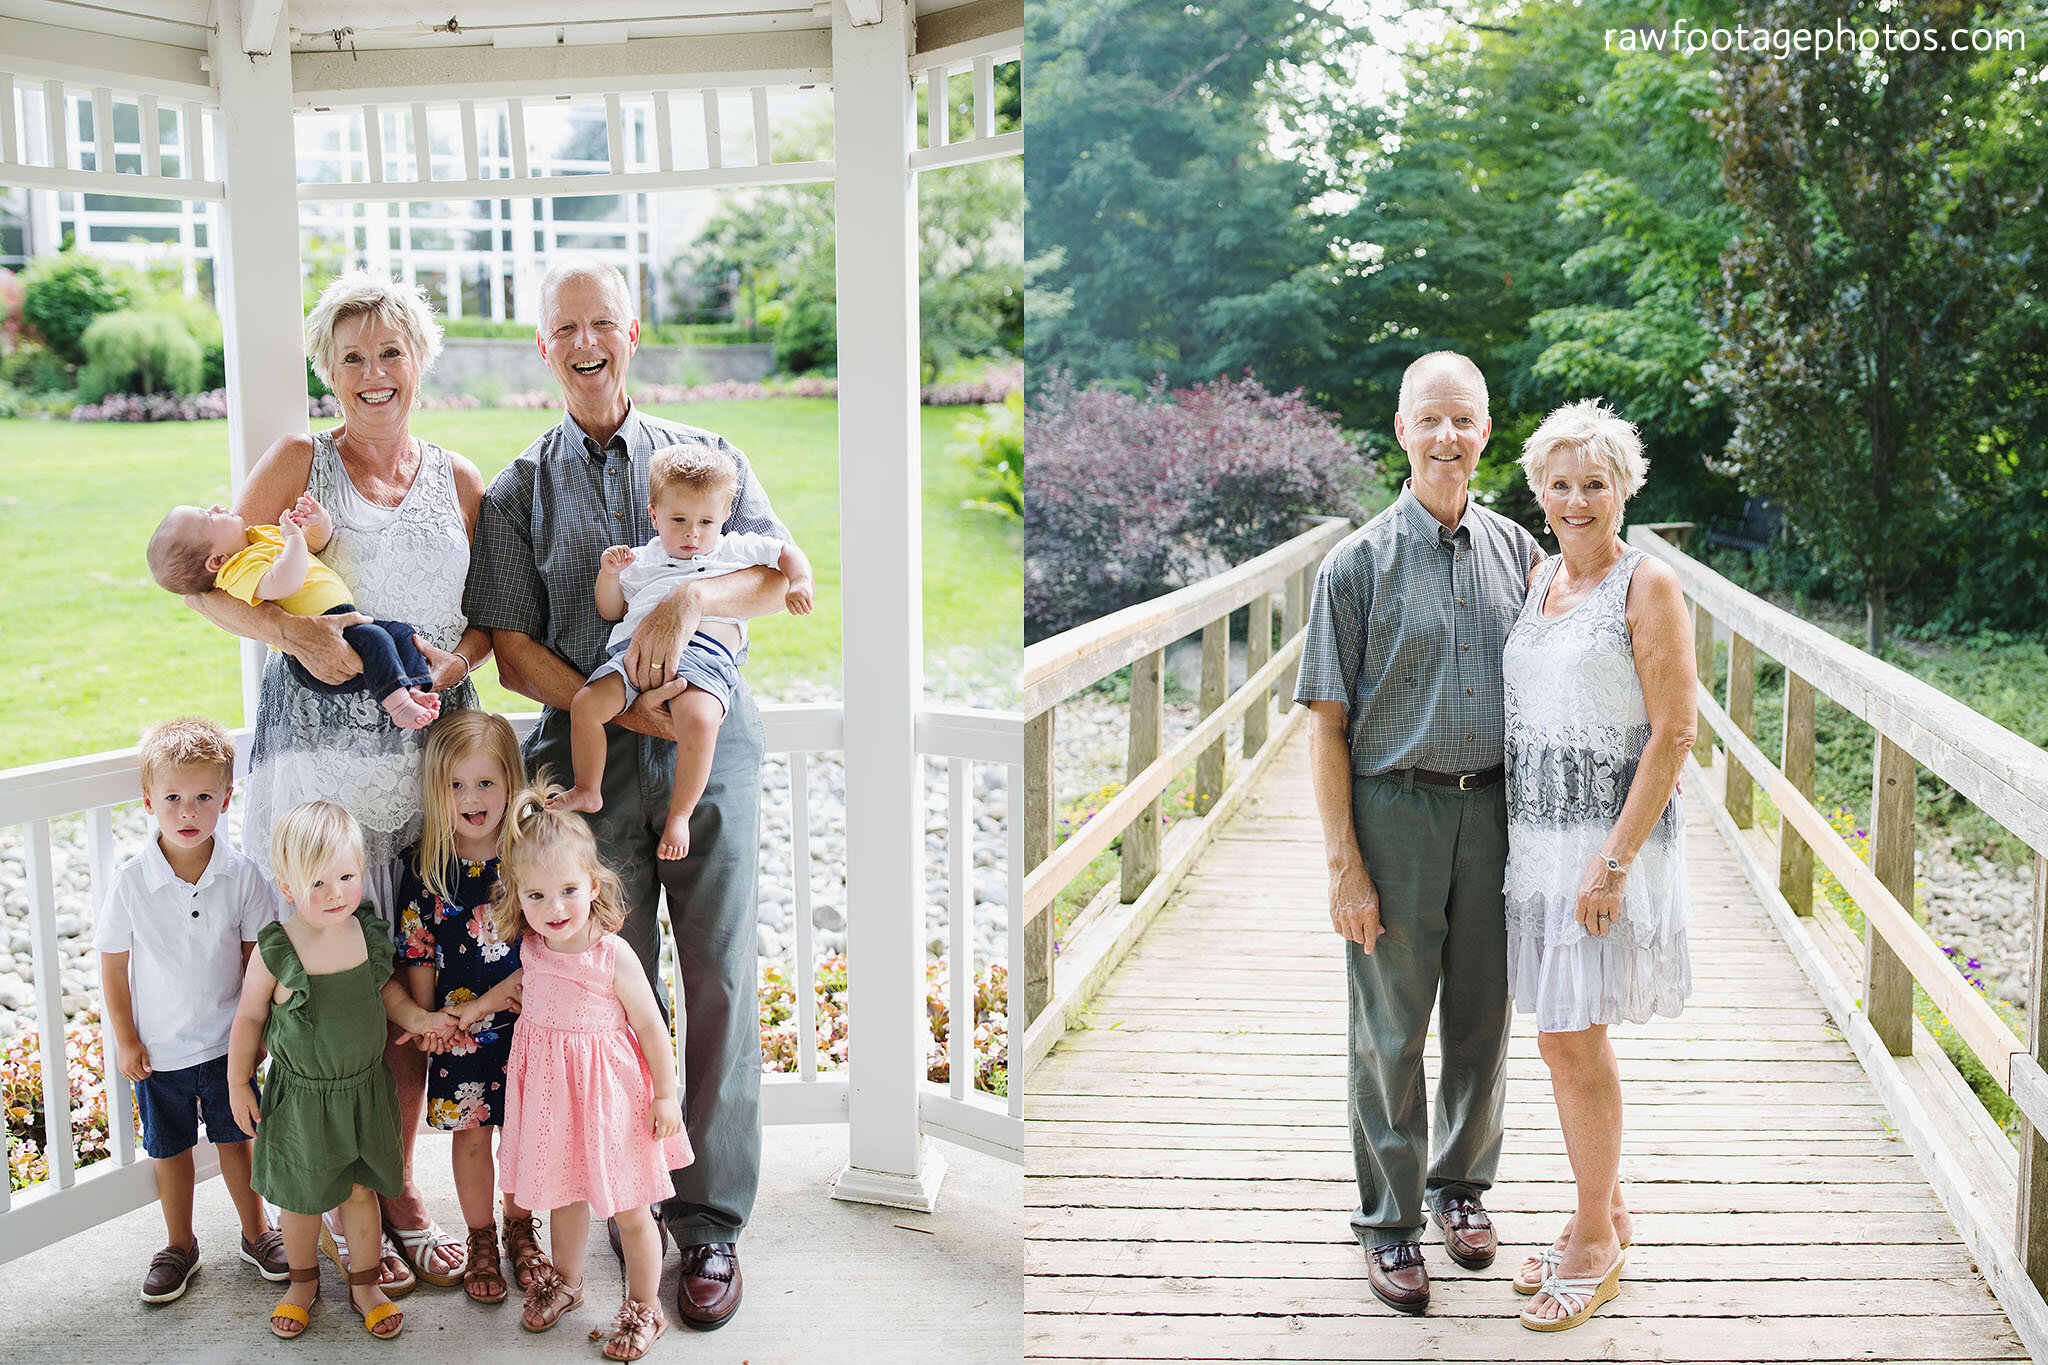 london_ontario_family_photographer-extended_family_session-grandparents-cousins-backyard_session-civic_gardens-raw_footage_photography-036.jpg